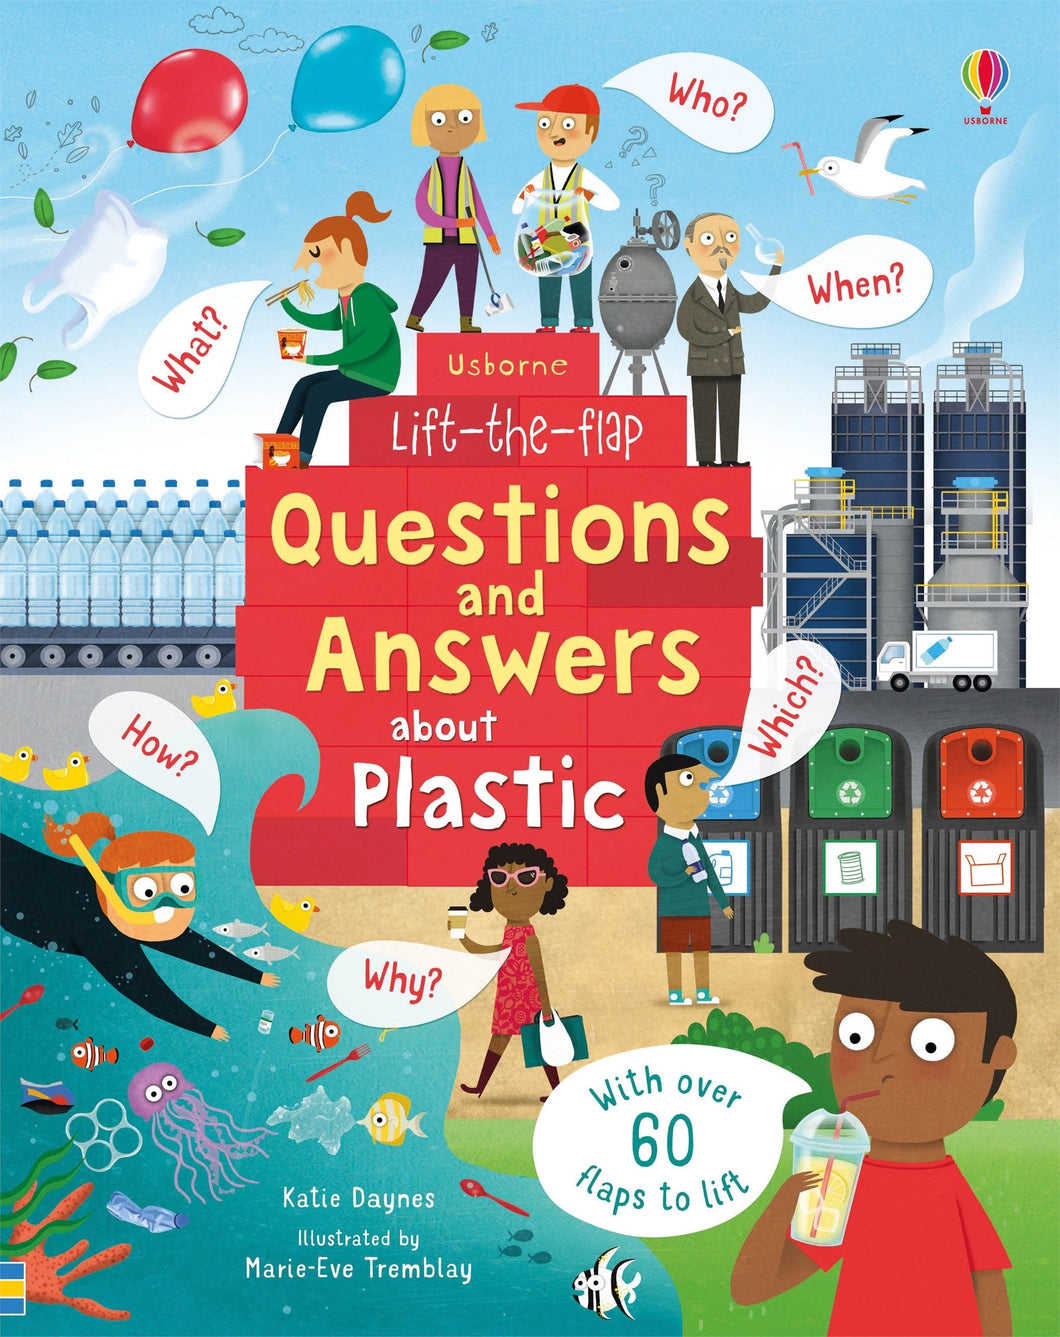 Lift-the-flap Questions and Answers: About Plastic